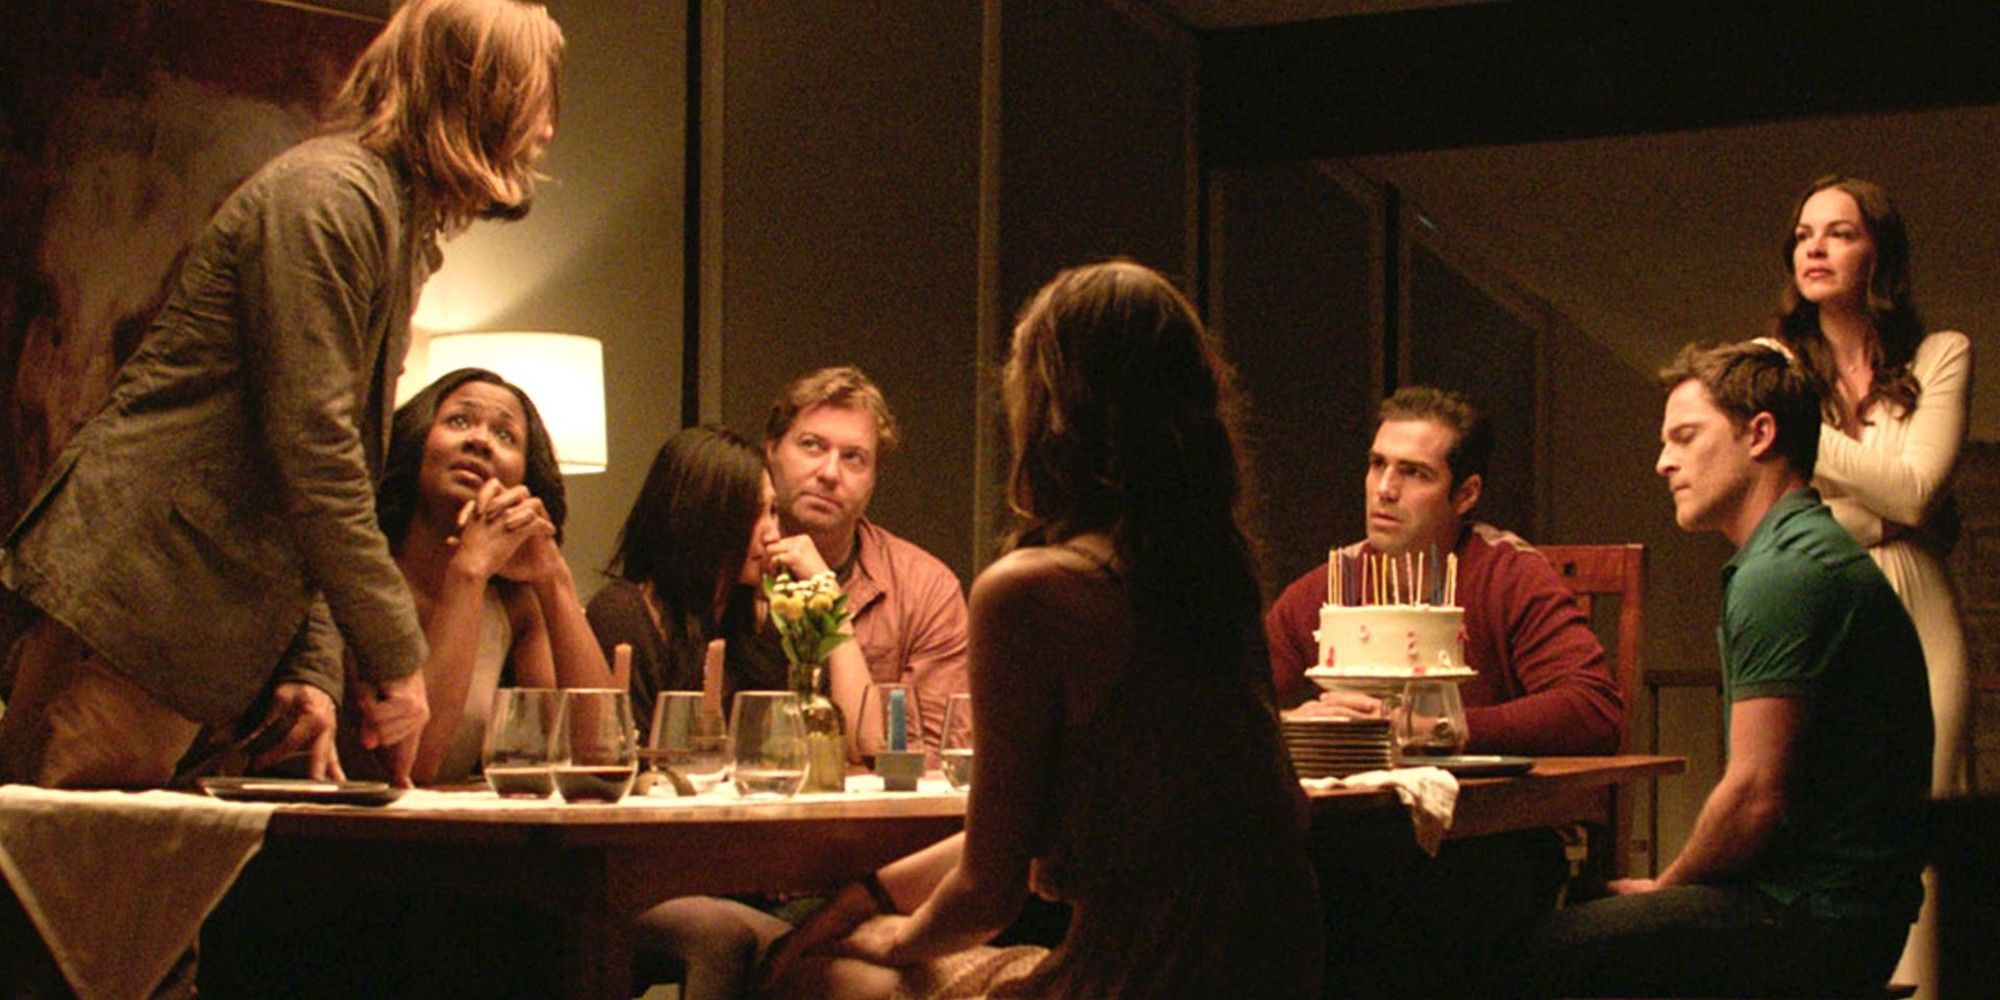 The cast of The Invitation, including Logan Marshall Green, gather around a dinner table